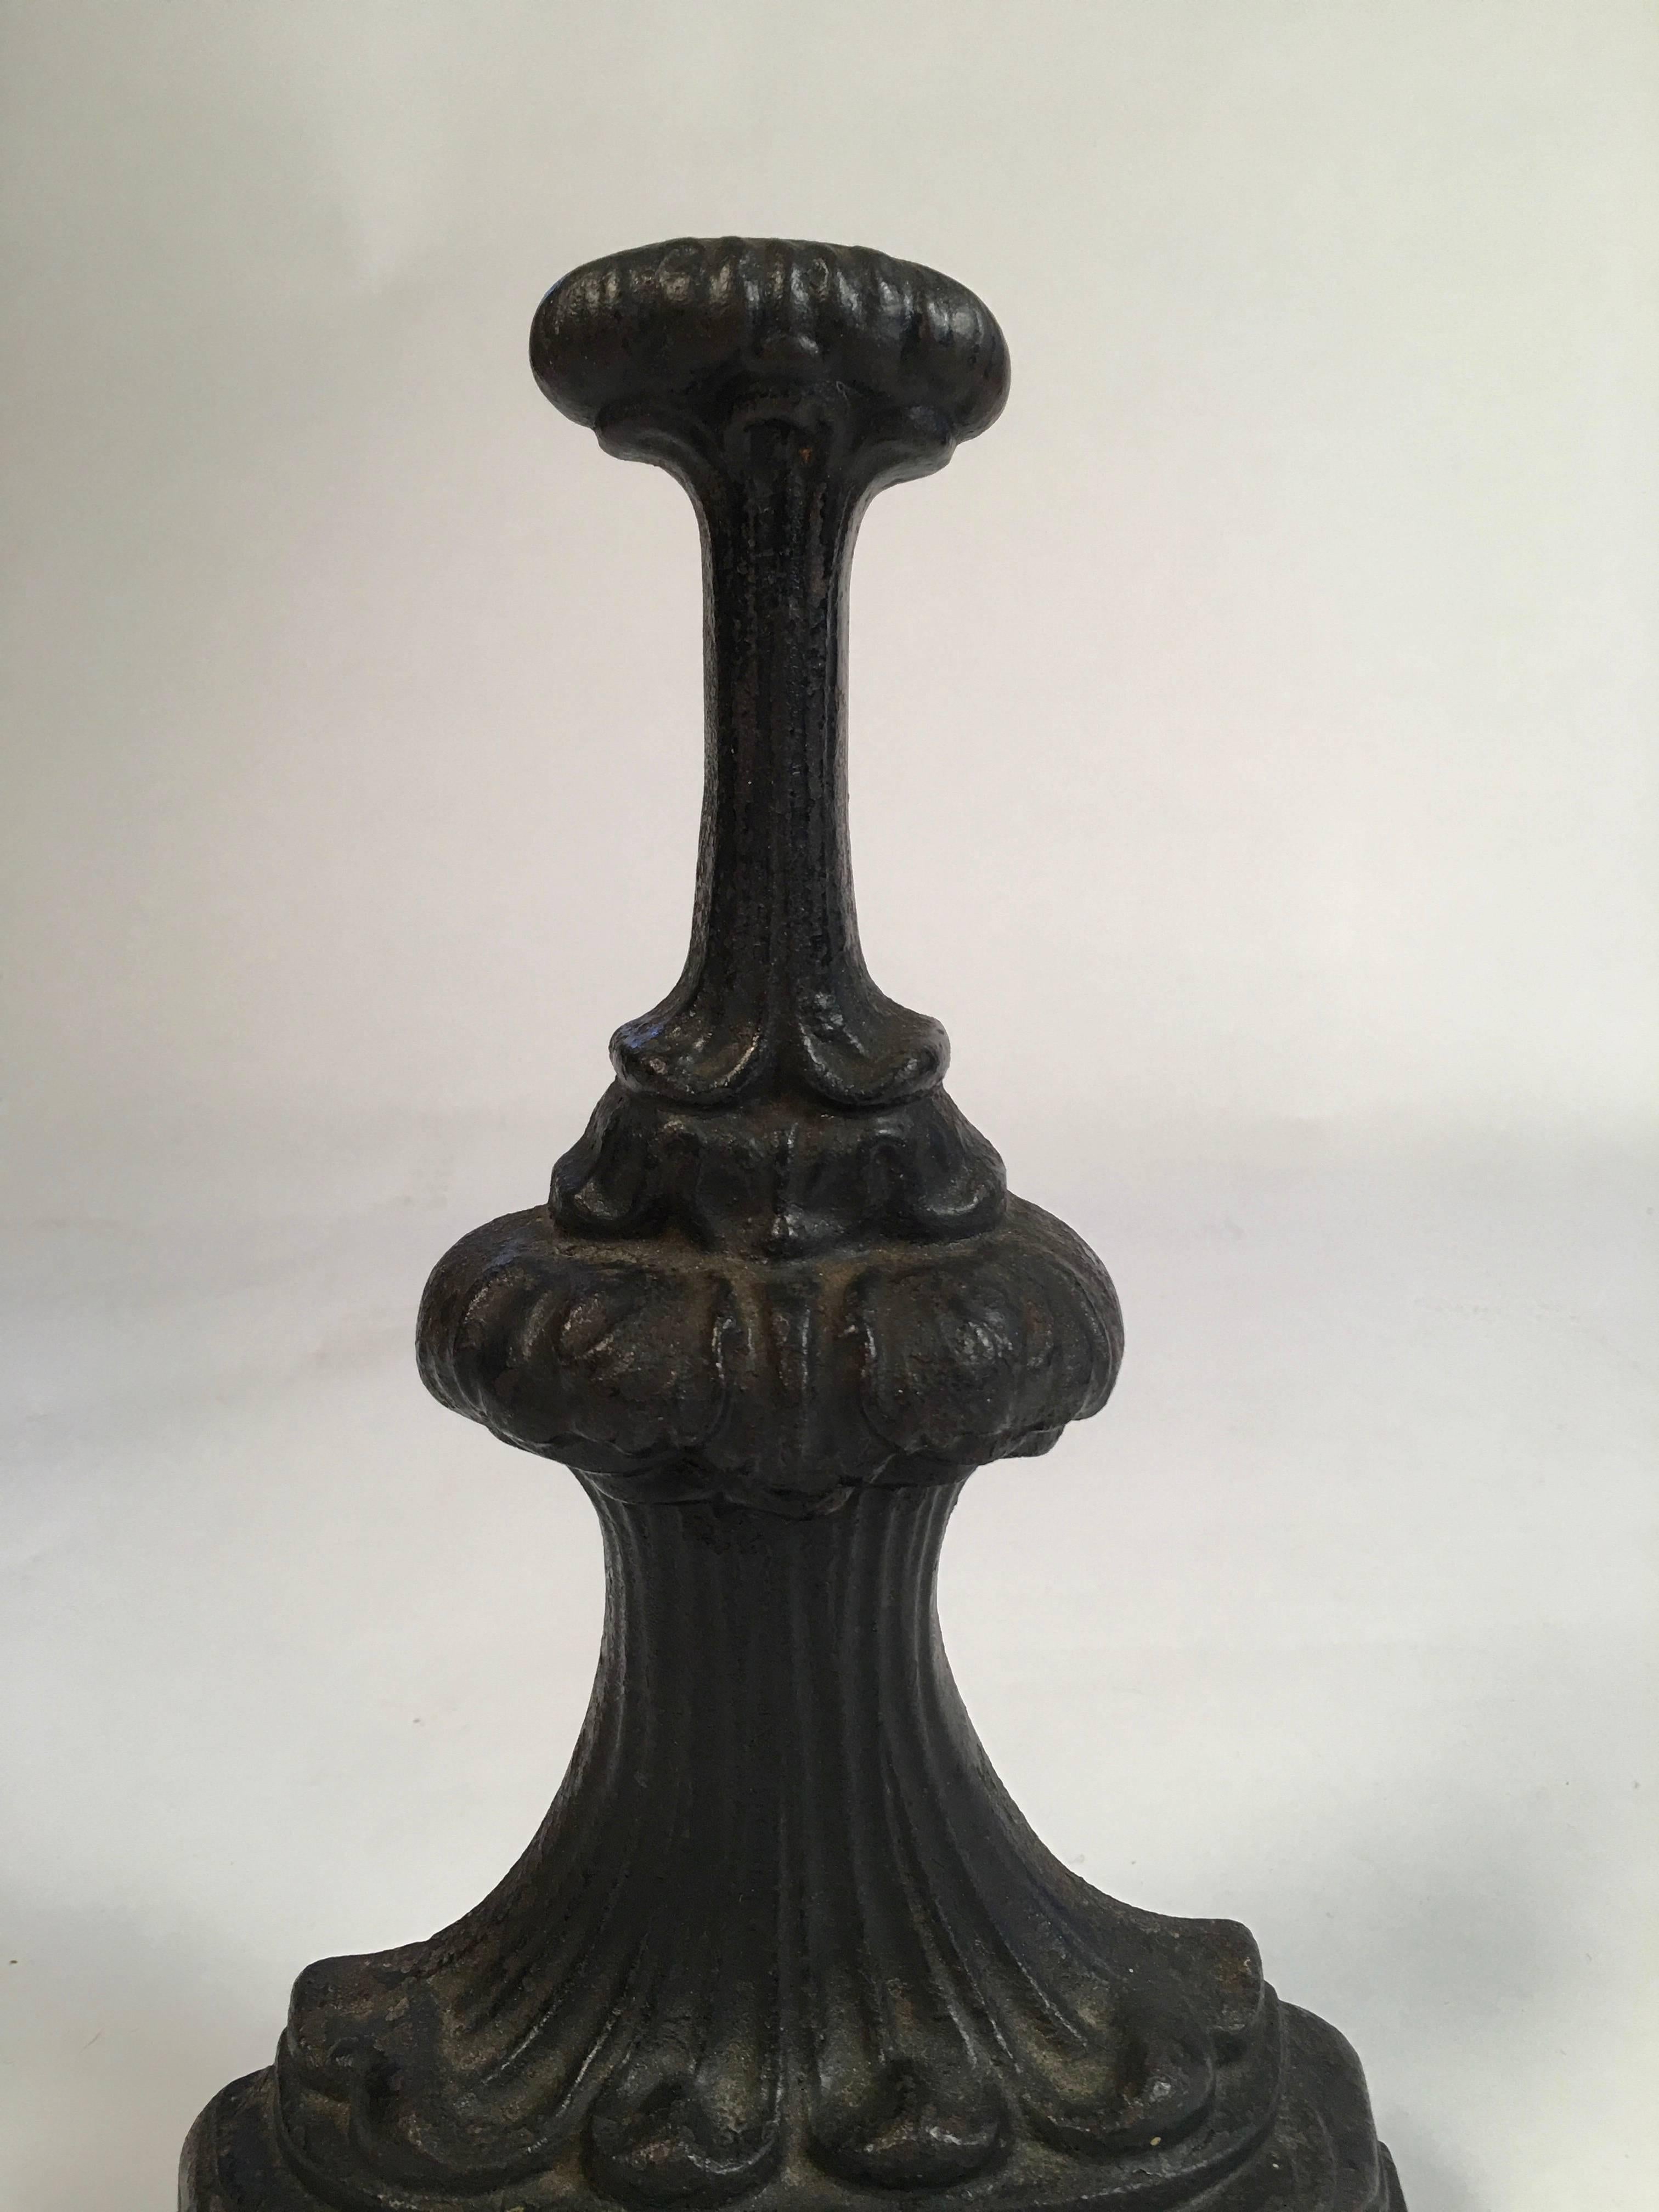 A Victorian cast iron door stop, with D-shaped base and sculptural top, decorated with acanthus, lotus and banded laurel leaf decoration, circa 1840-1860.